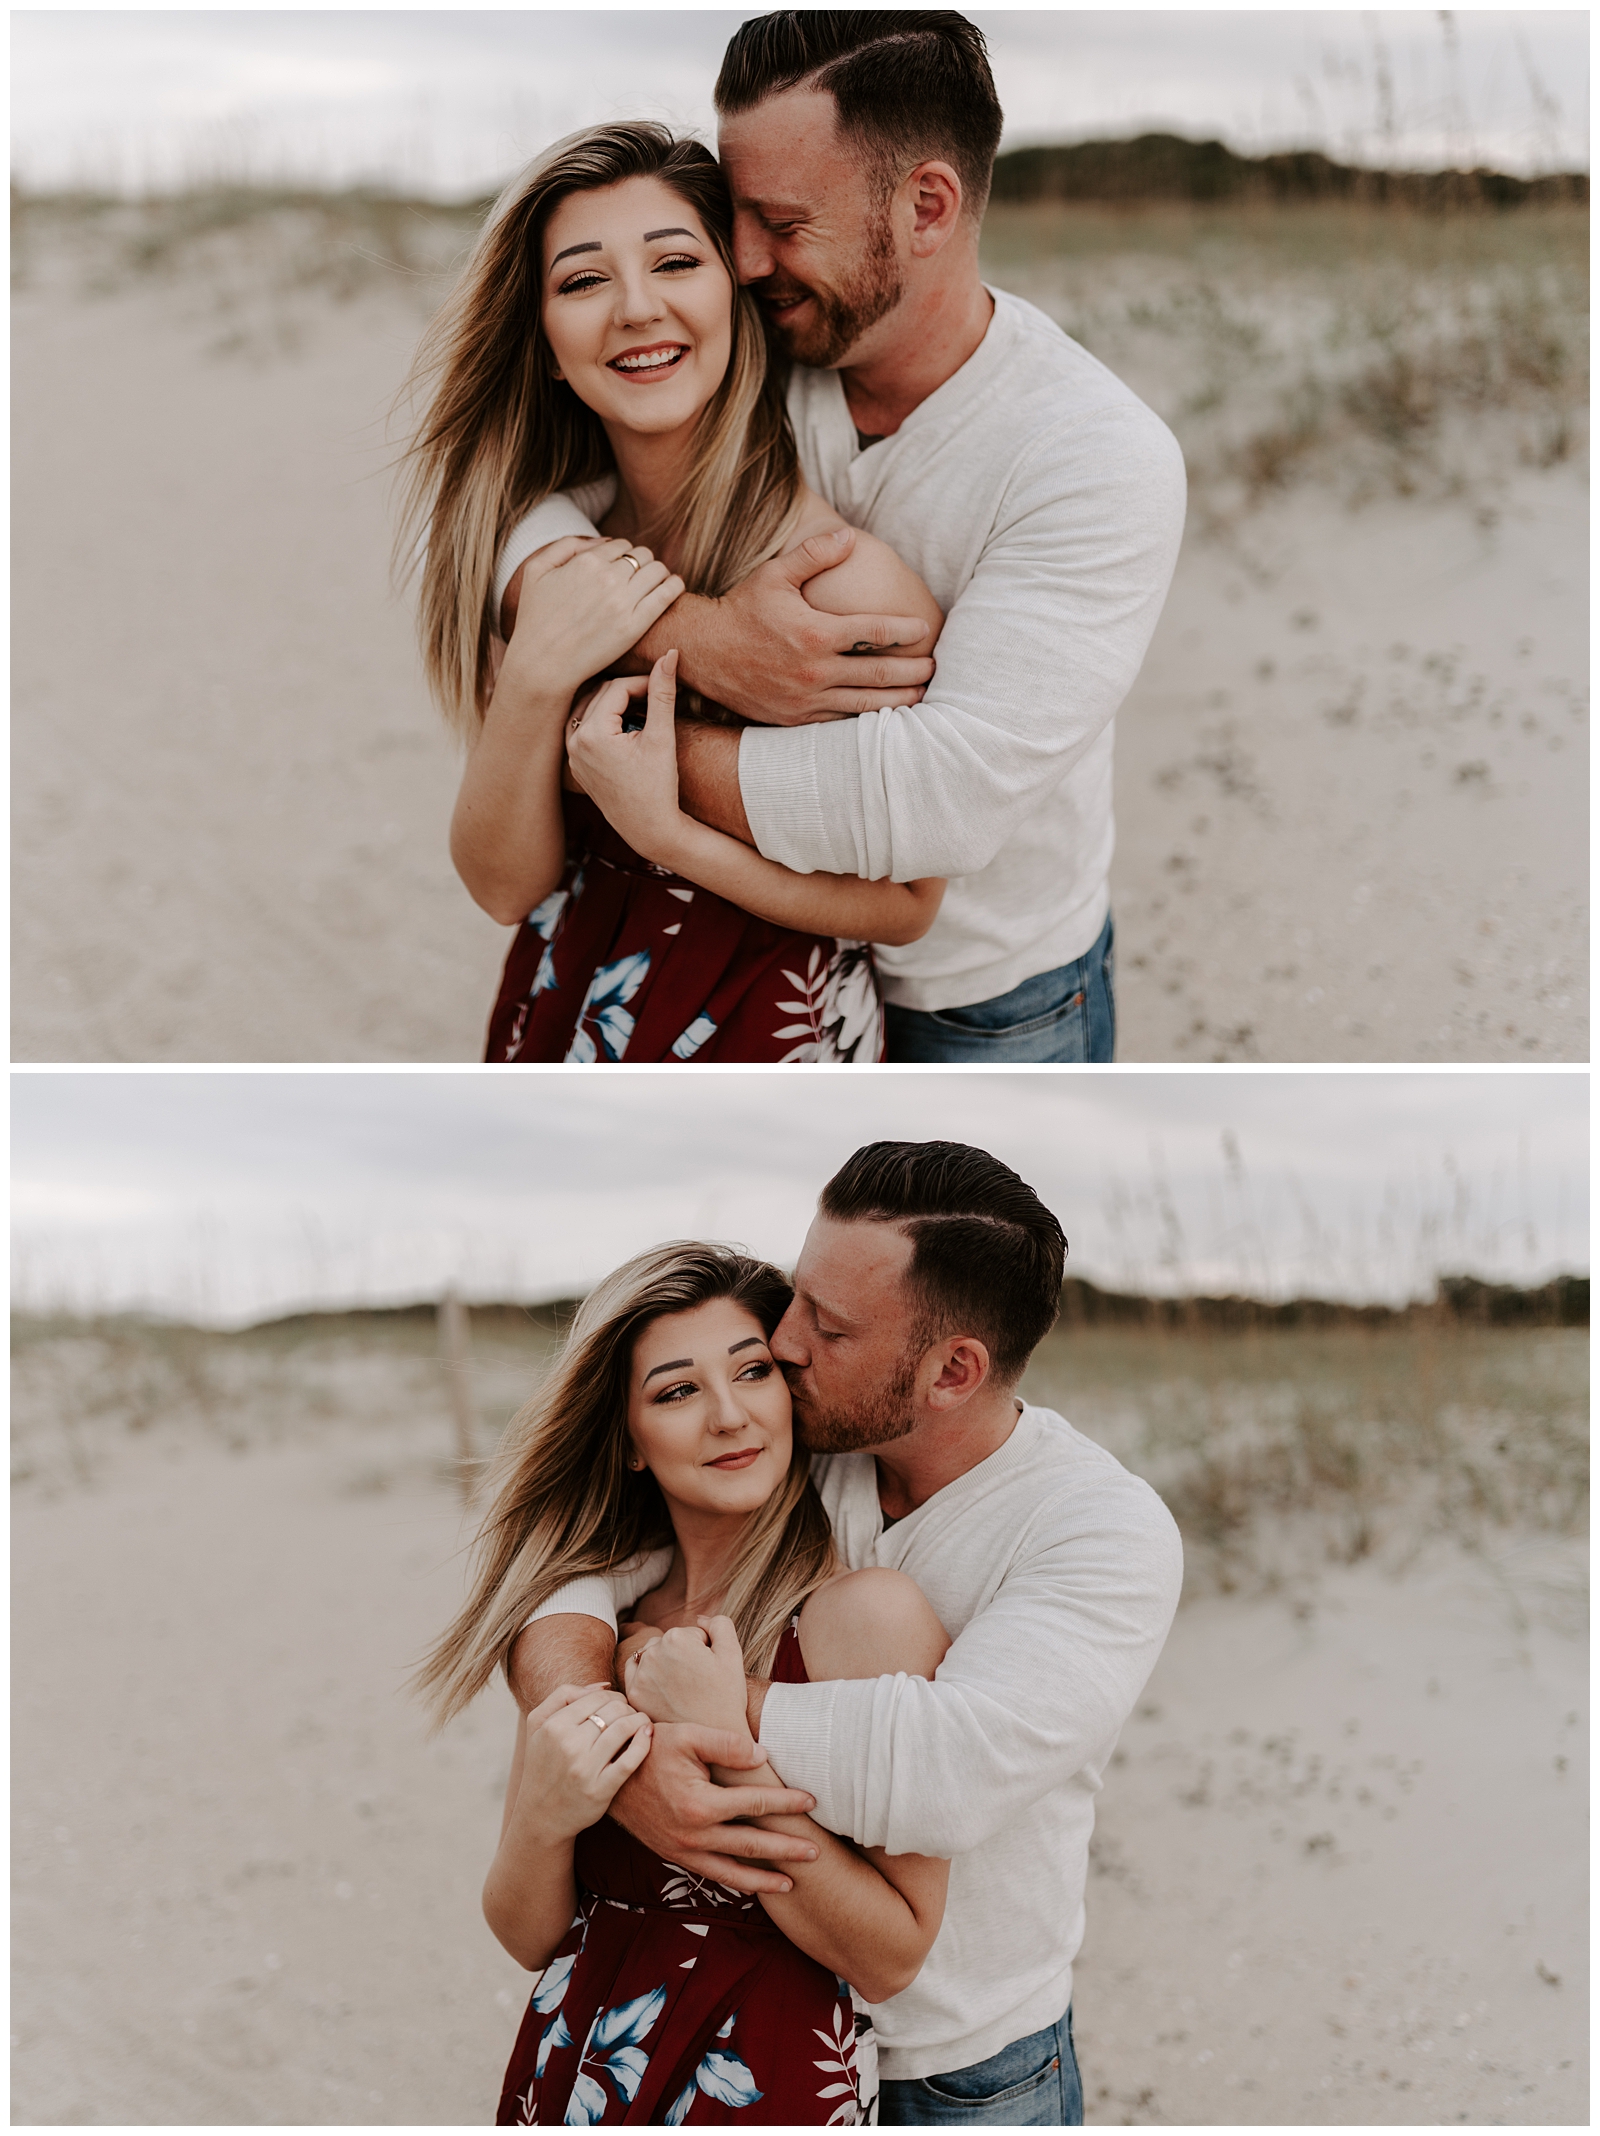 Hugs and kisses at their beach engagement session in Wilmington, NC